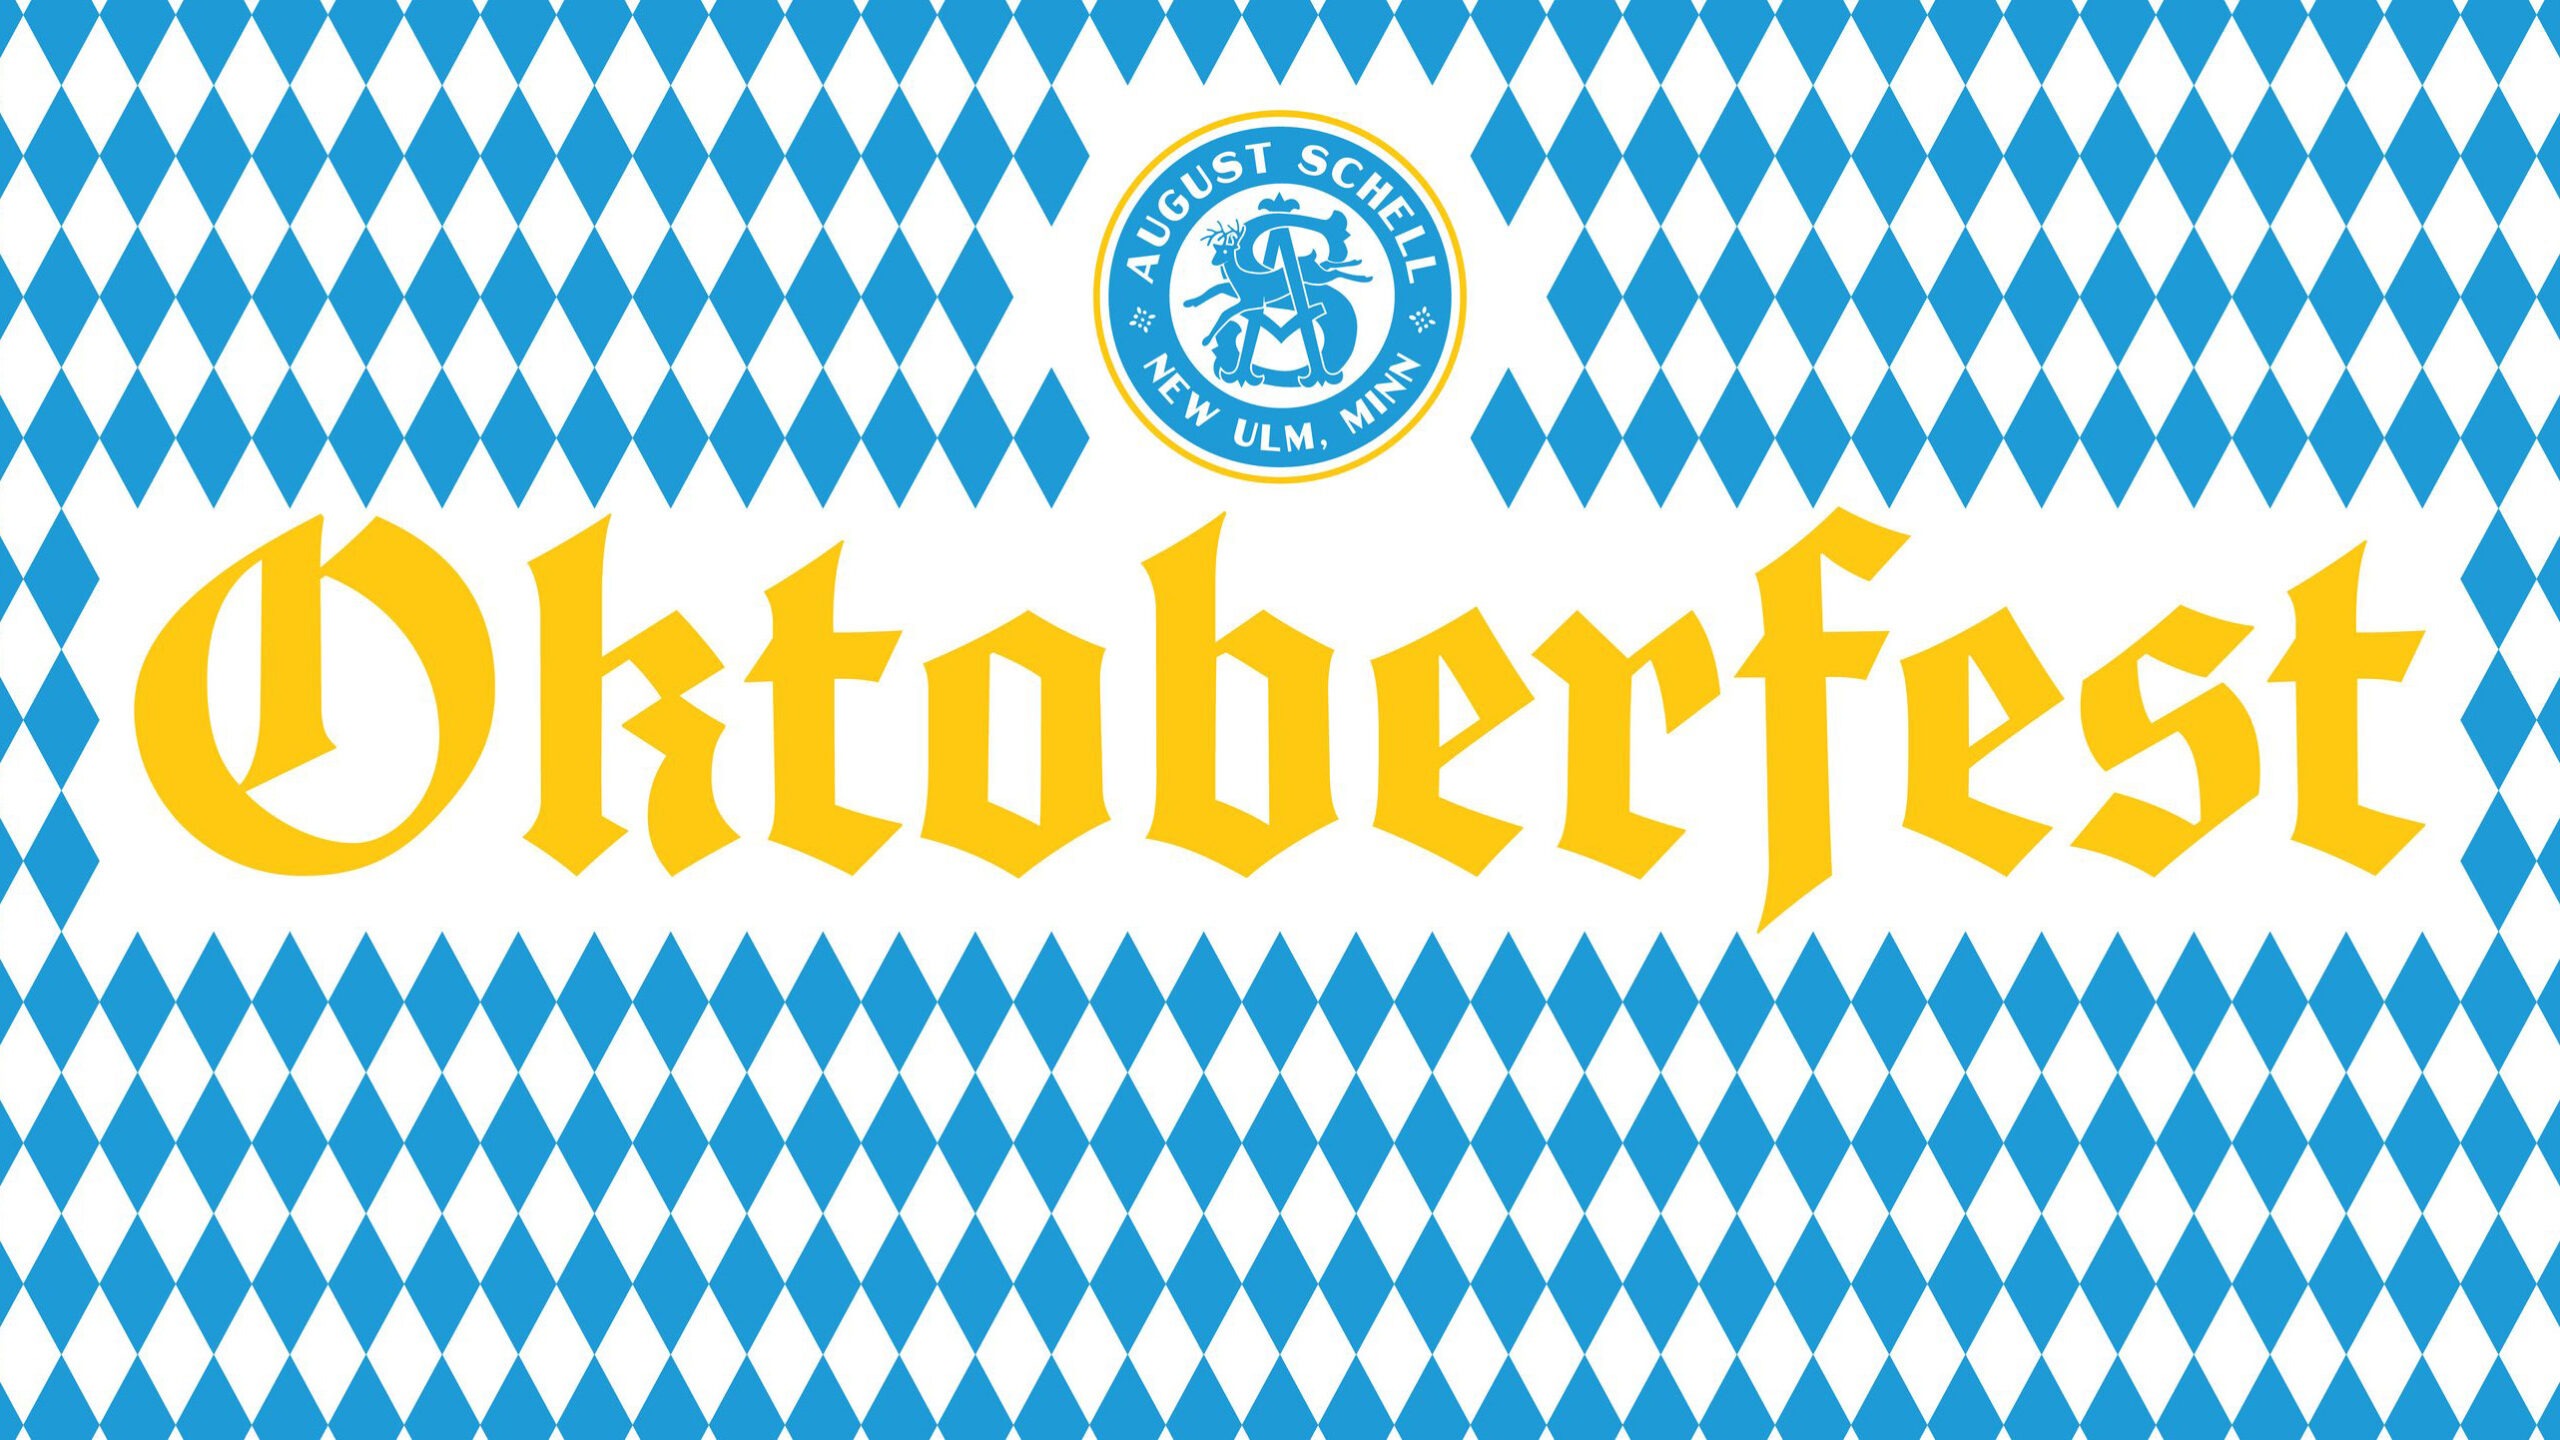 Yellow "Oktoberfest" text in an Old English-style font, centered on top of a diamond-checkered blue and white Bavarian style background. August Schell Brewing Company circular logo is above "Oktoberfest"